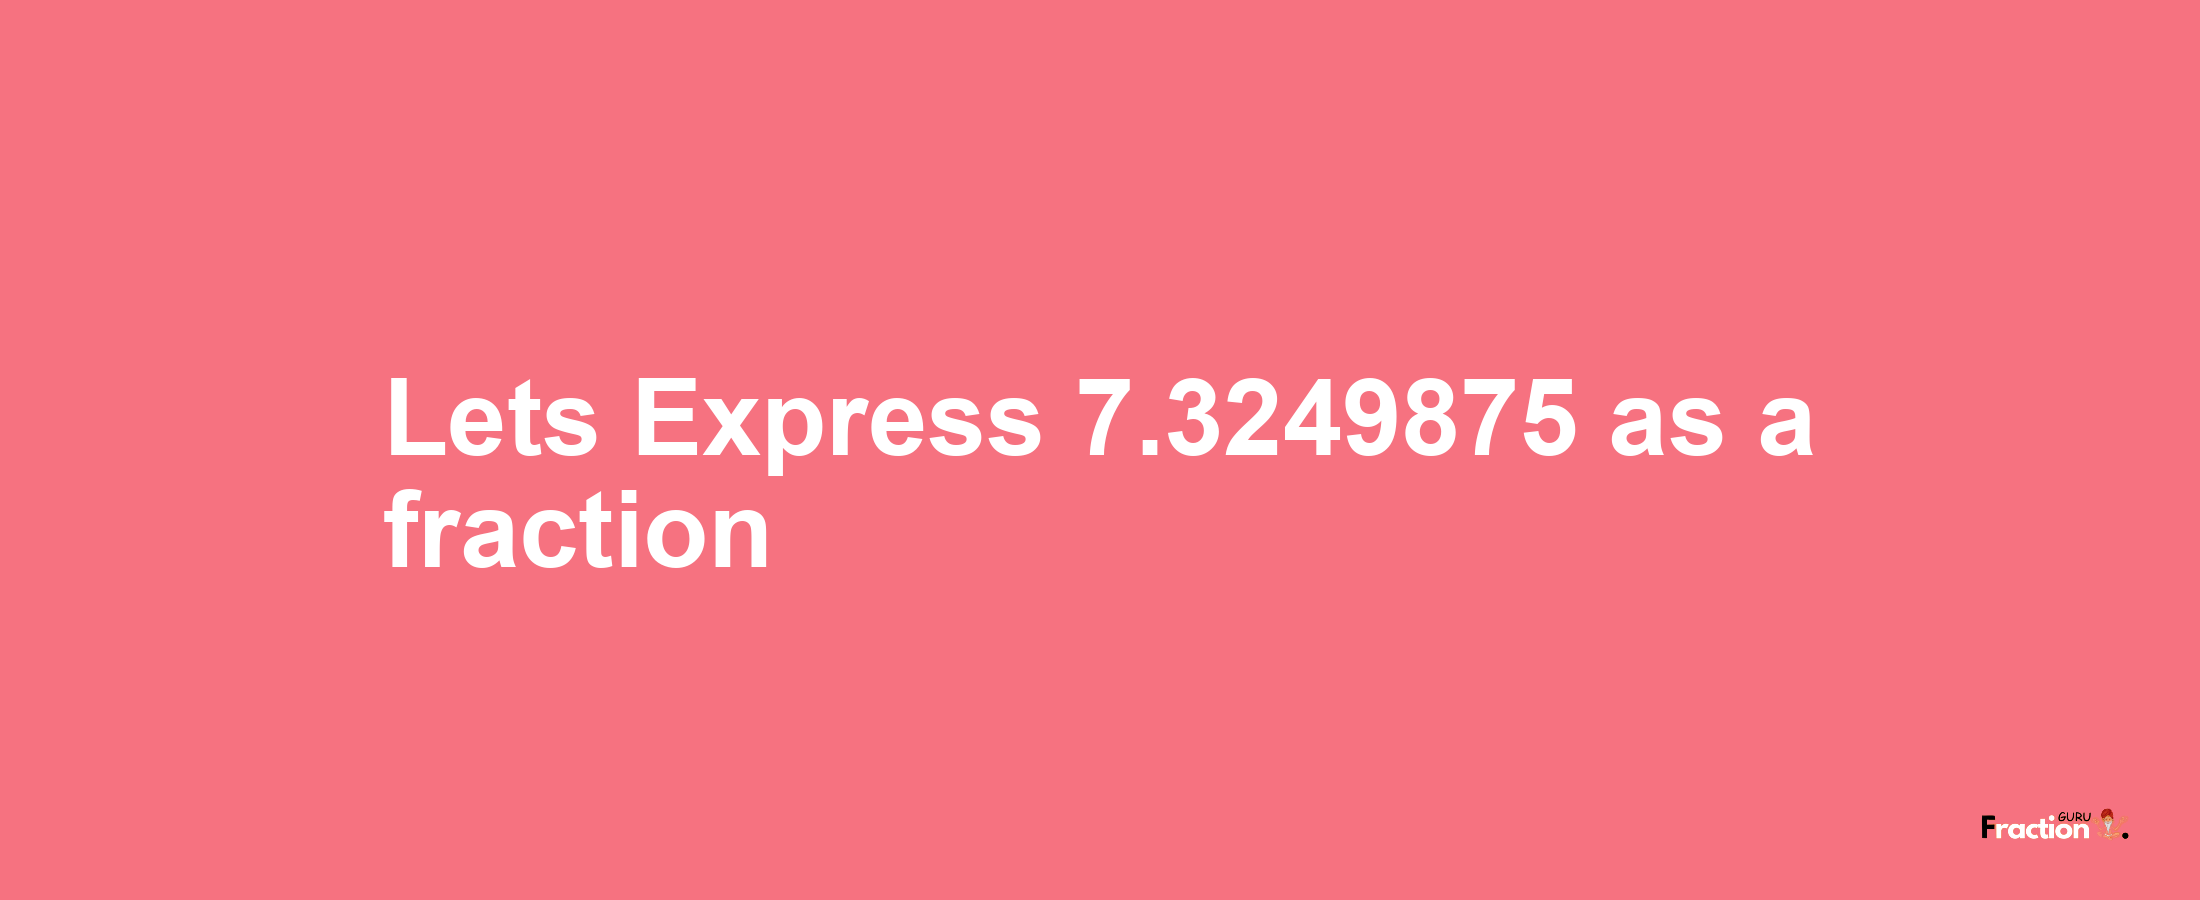 Lets Express 7.3249875 as afraction